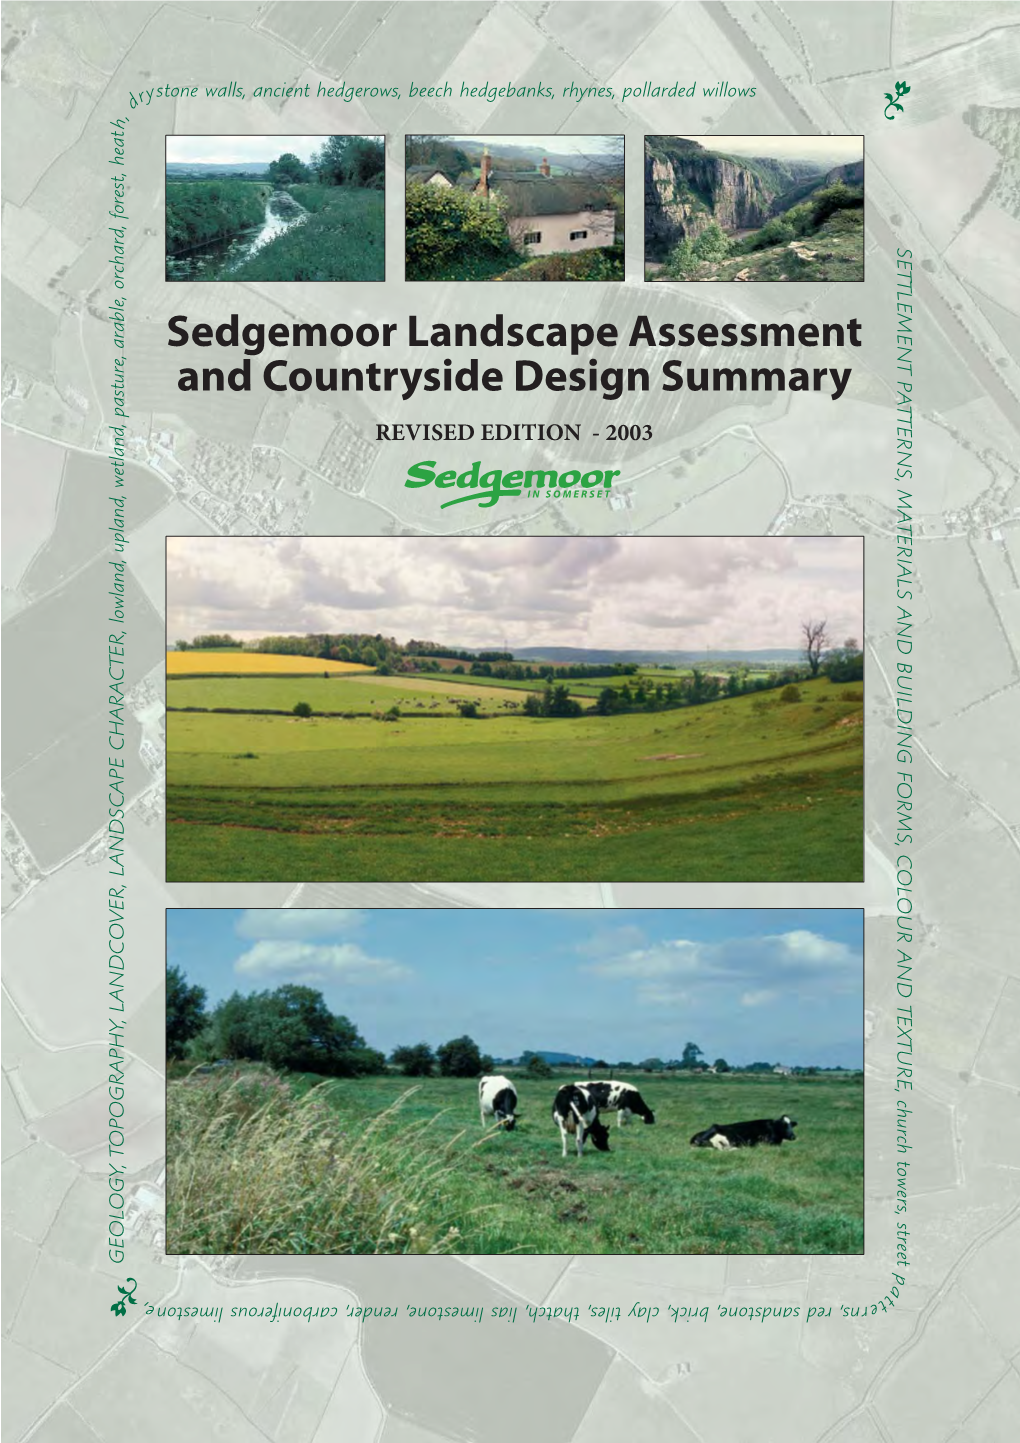 Sedgemoor Landscape Assessment and Countryside Design Summary REVISED EDITION - 2003